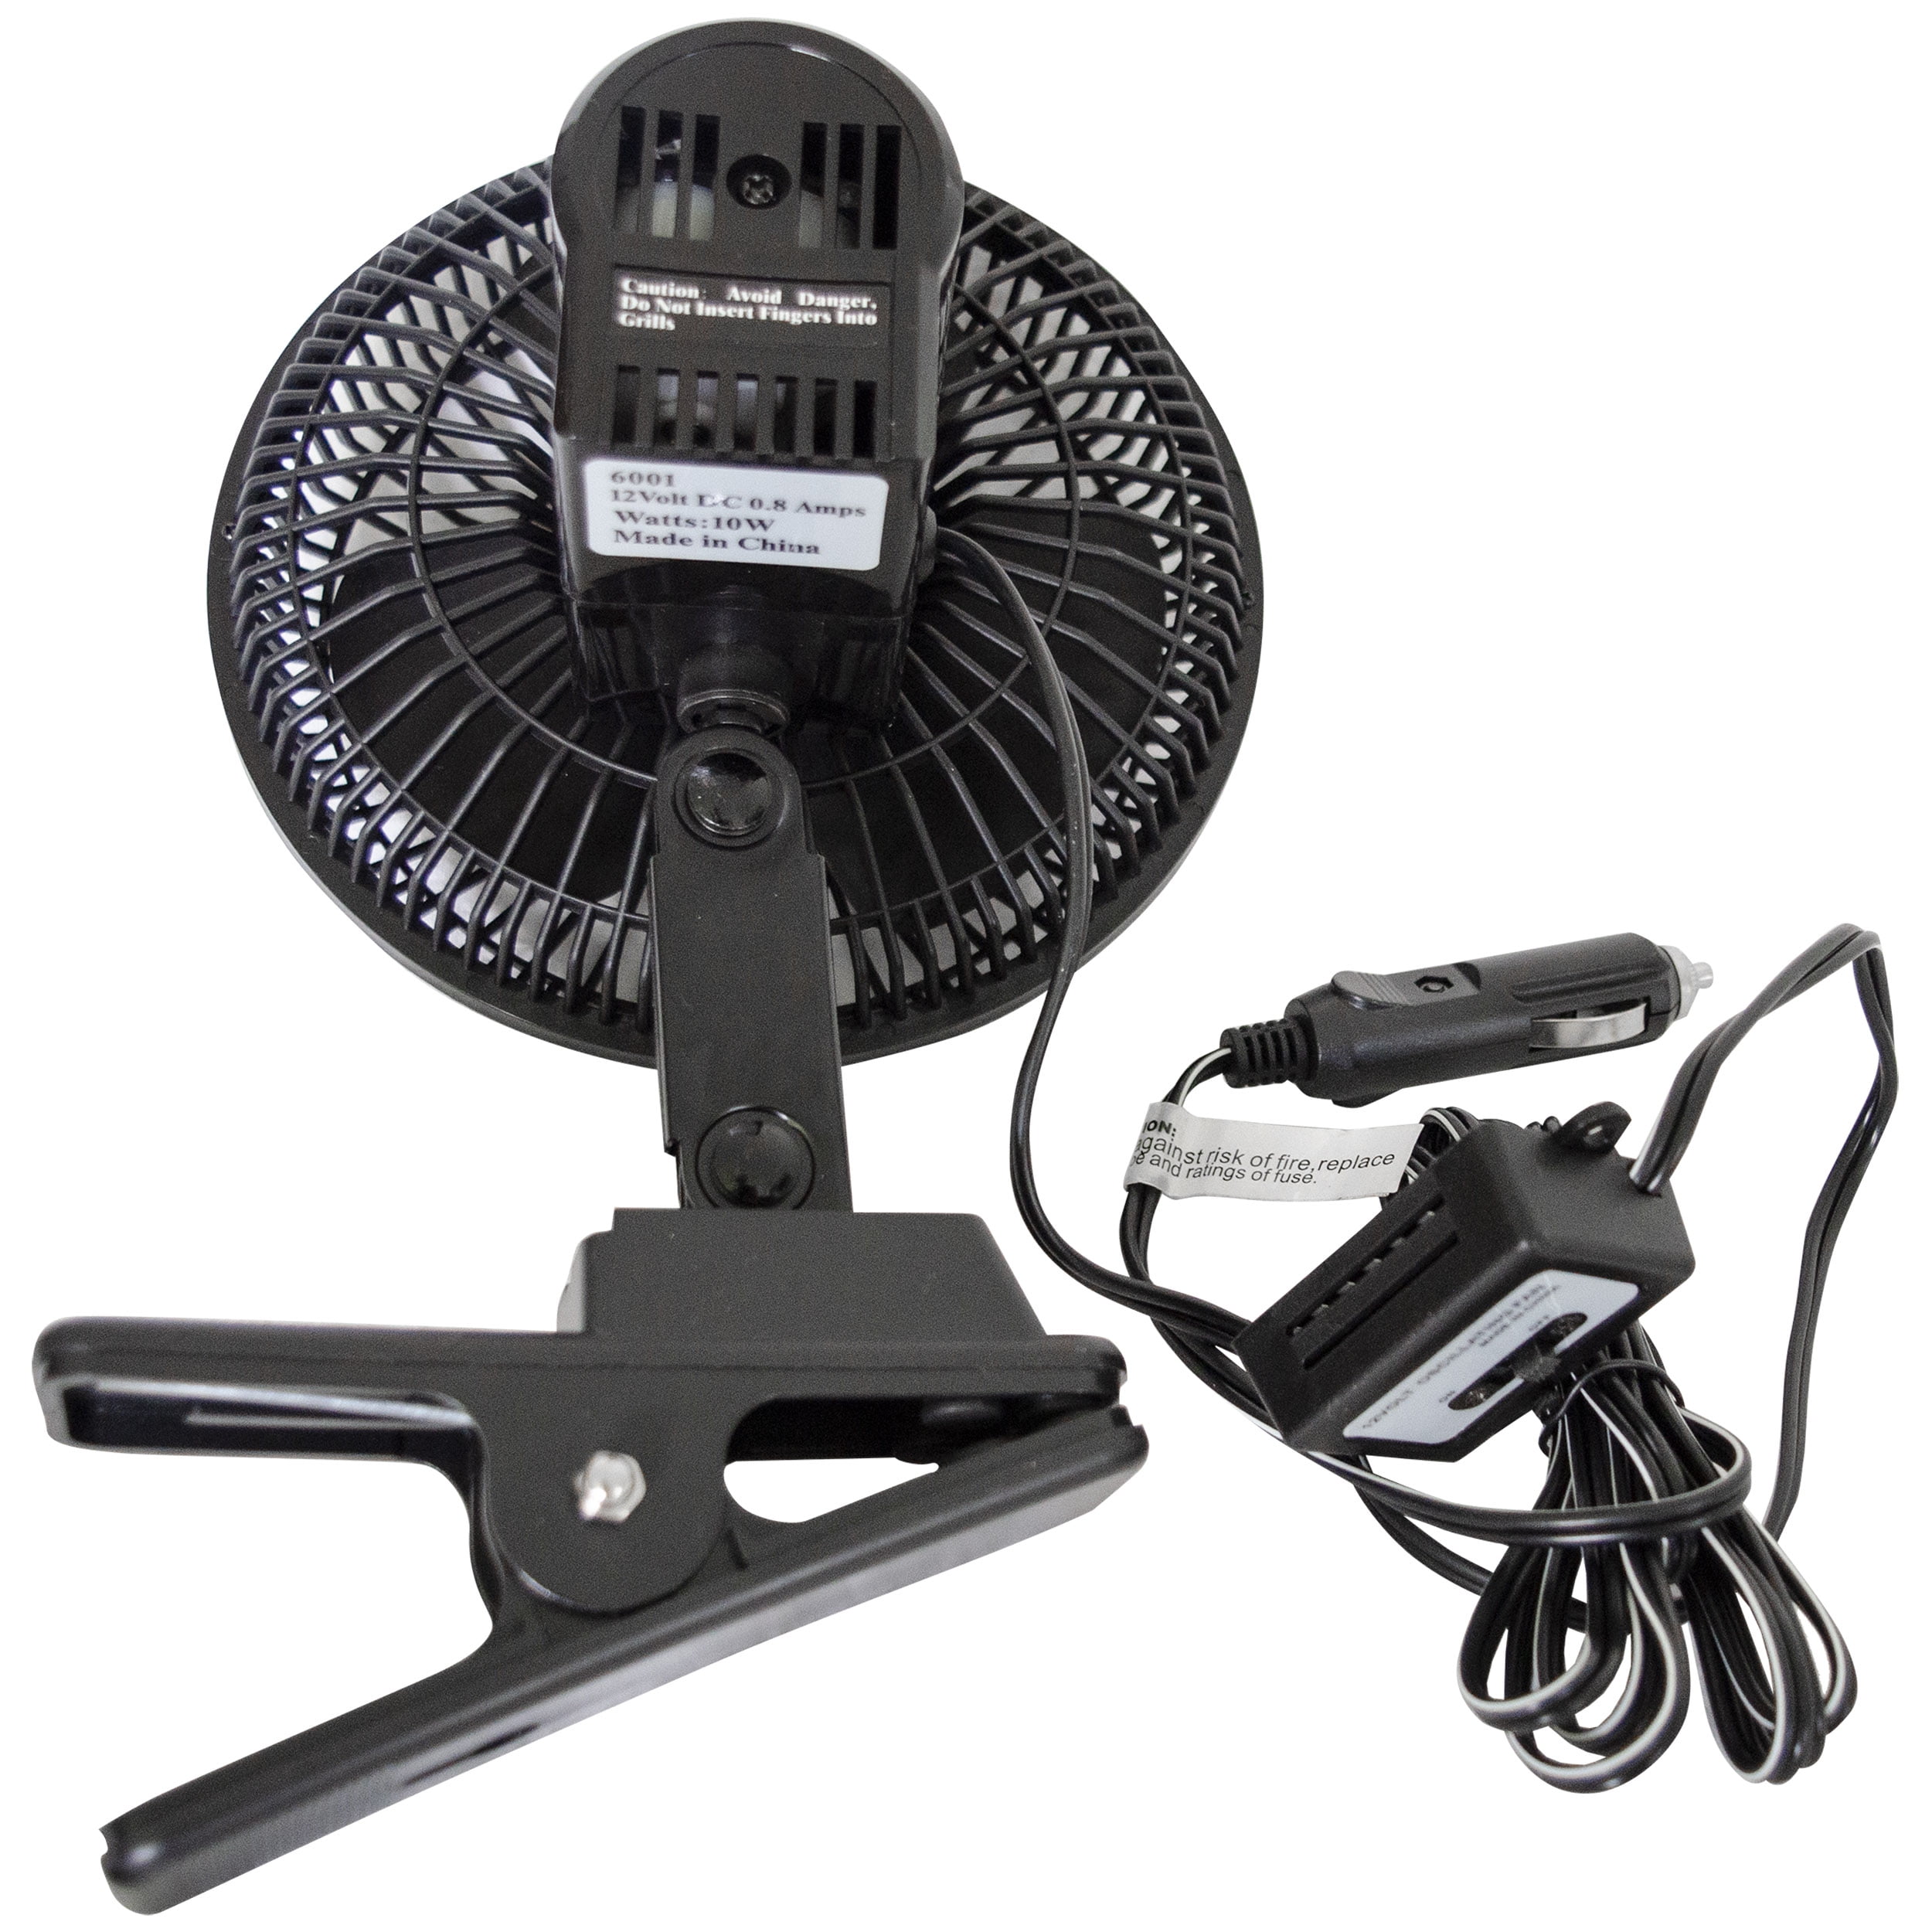 Outdoor Air Circulation Car Styling Portable Auto Oscillating Cooling Fan  Ventilator with Clip Mini Electric Low Noise